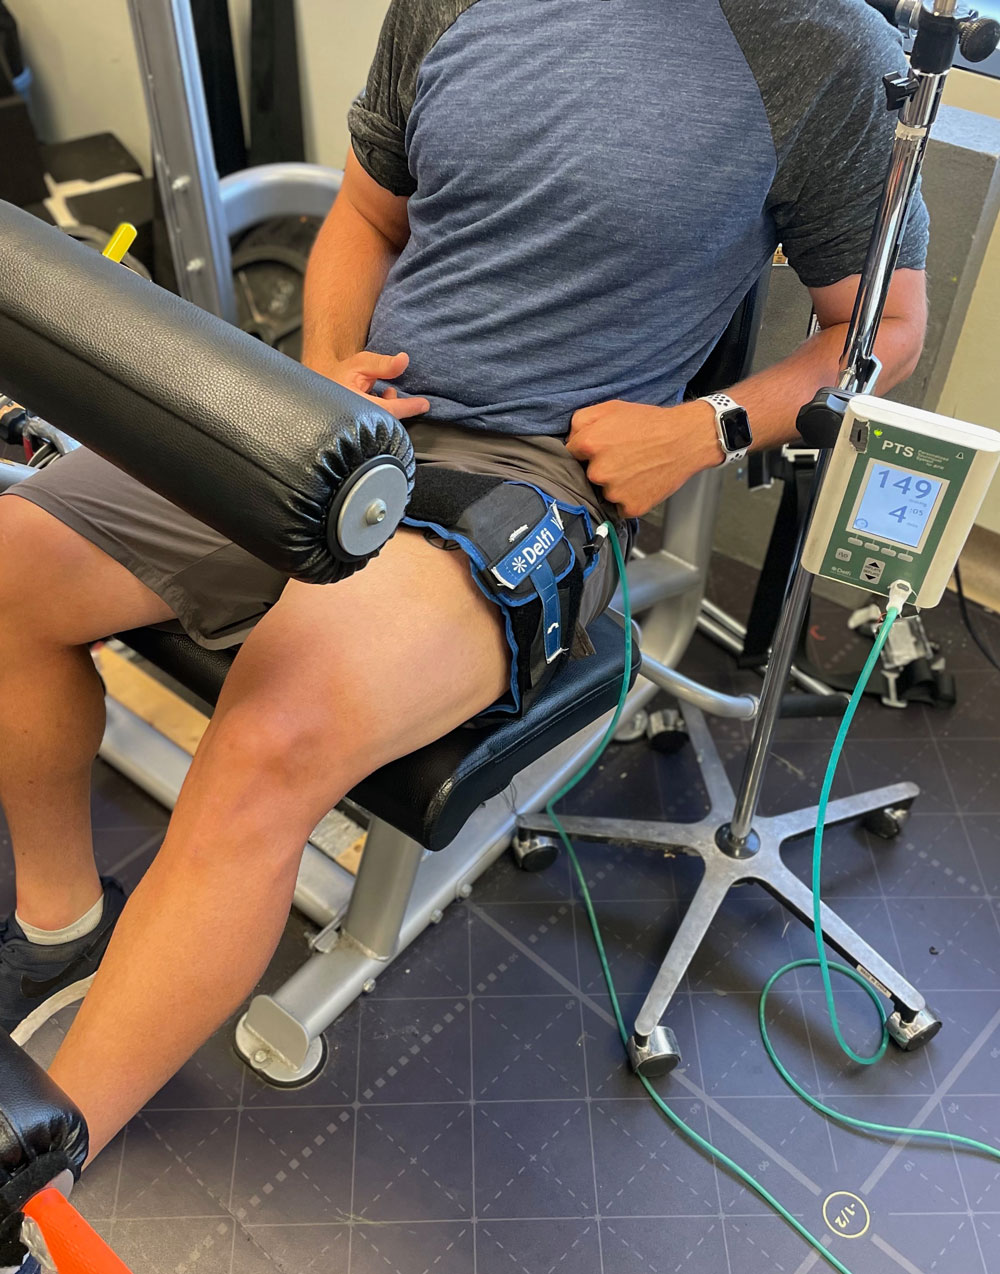 Recent Advances in the Application of Blood Flow Restriction for Health and Performance